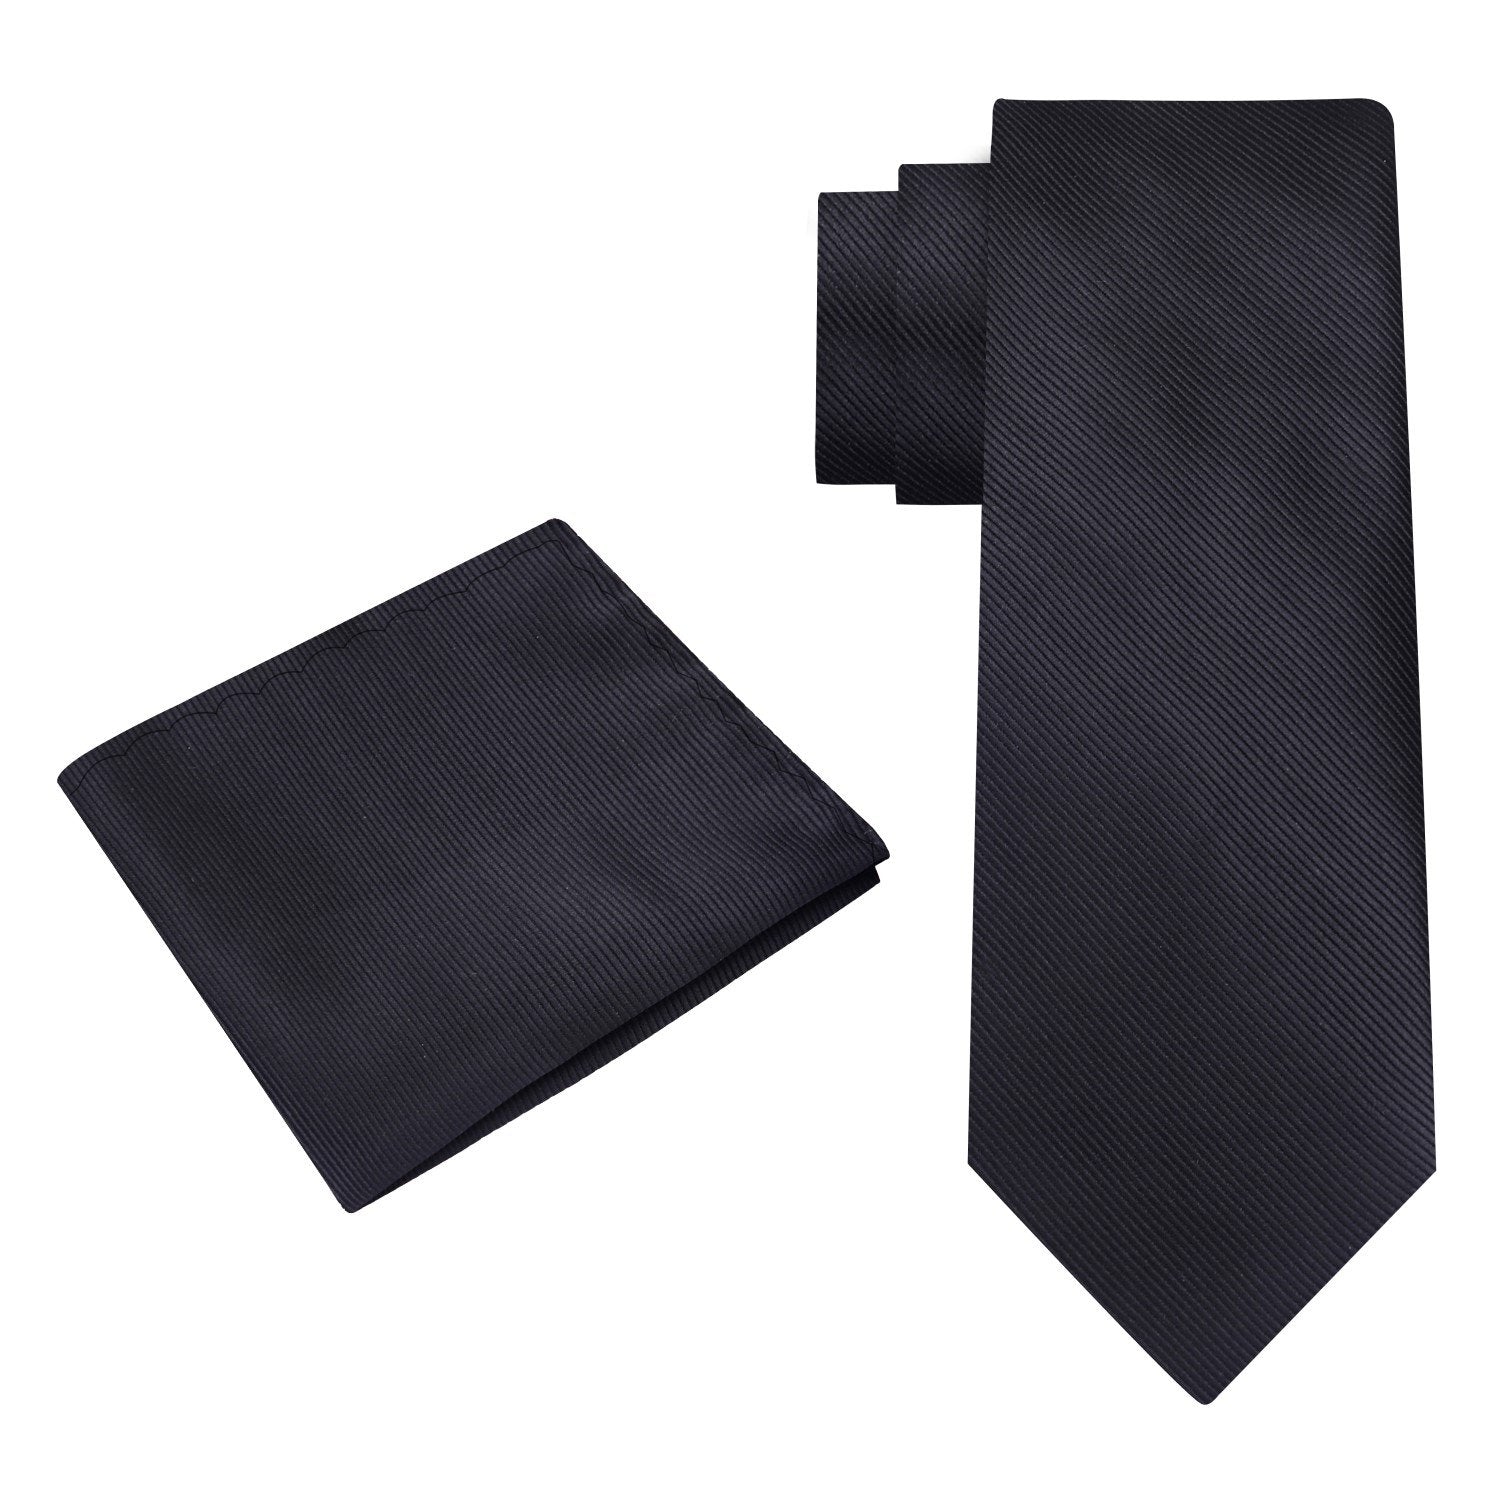 Alt View: A Solid Black Colored Silk Necktie With Matching Pocket Square||Black